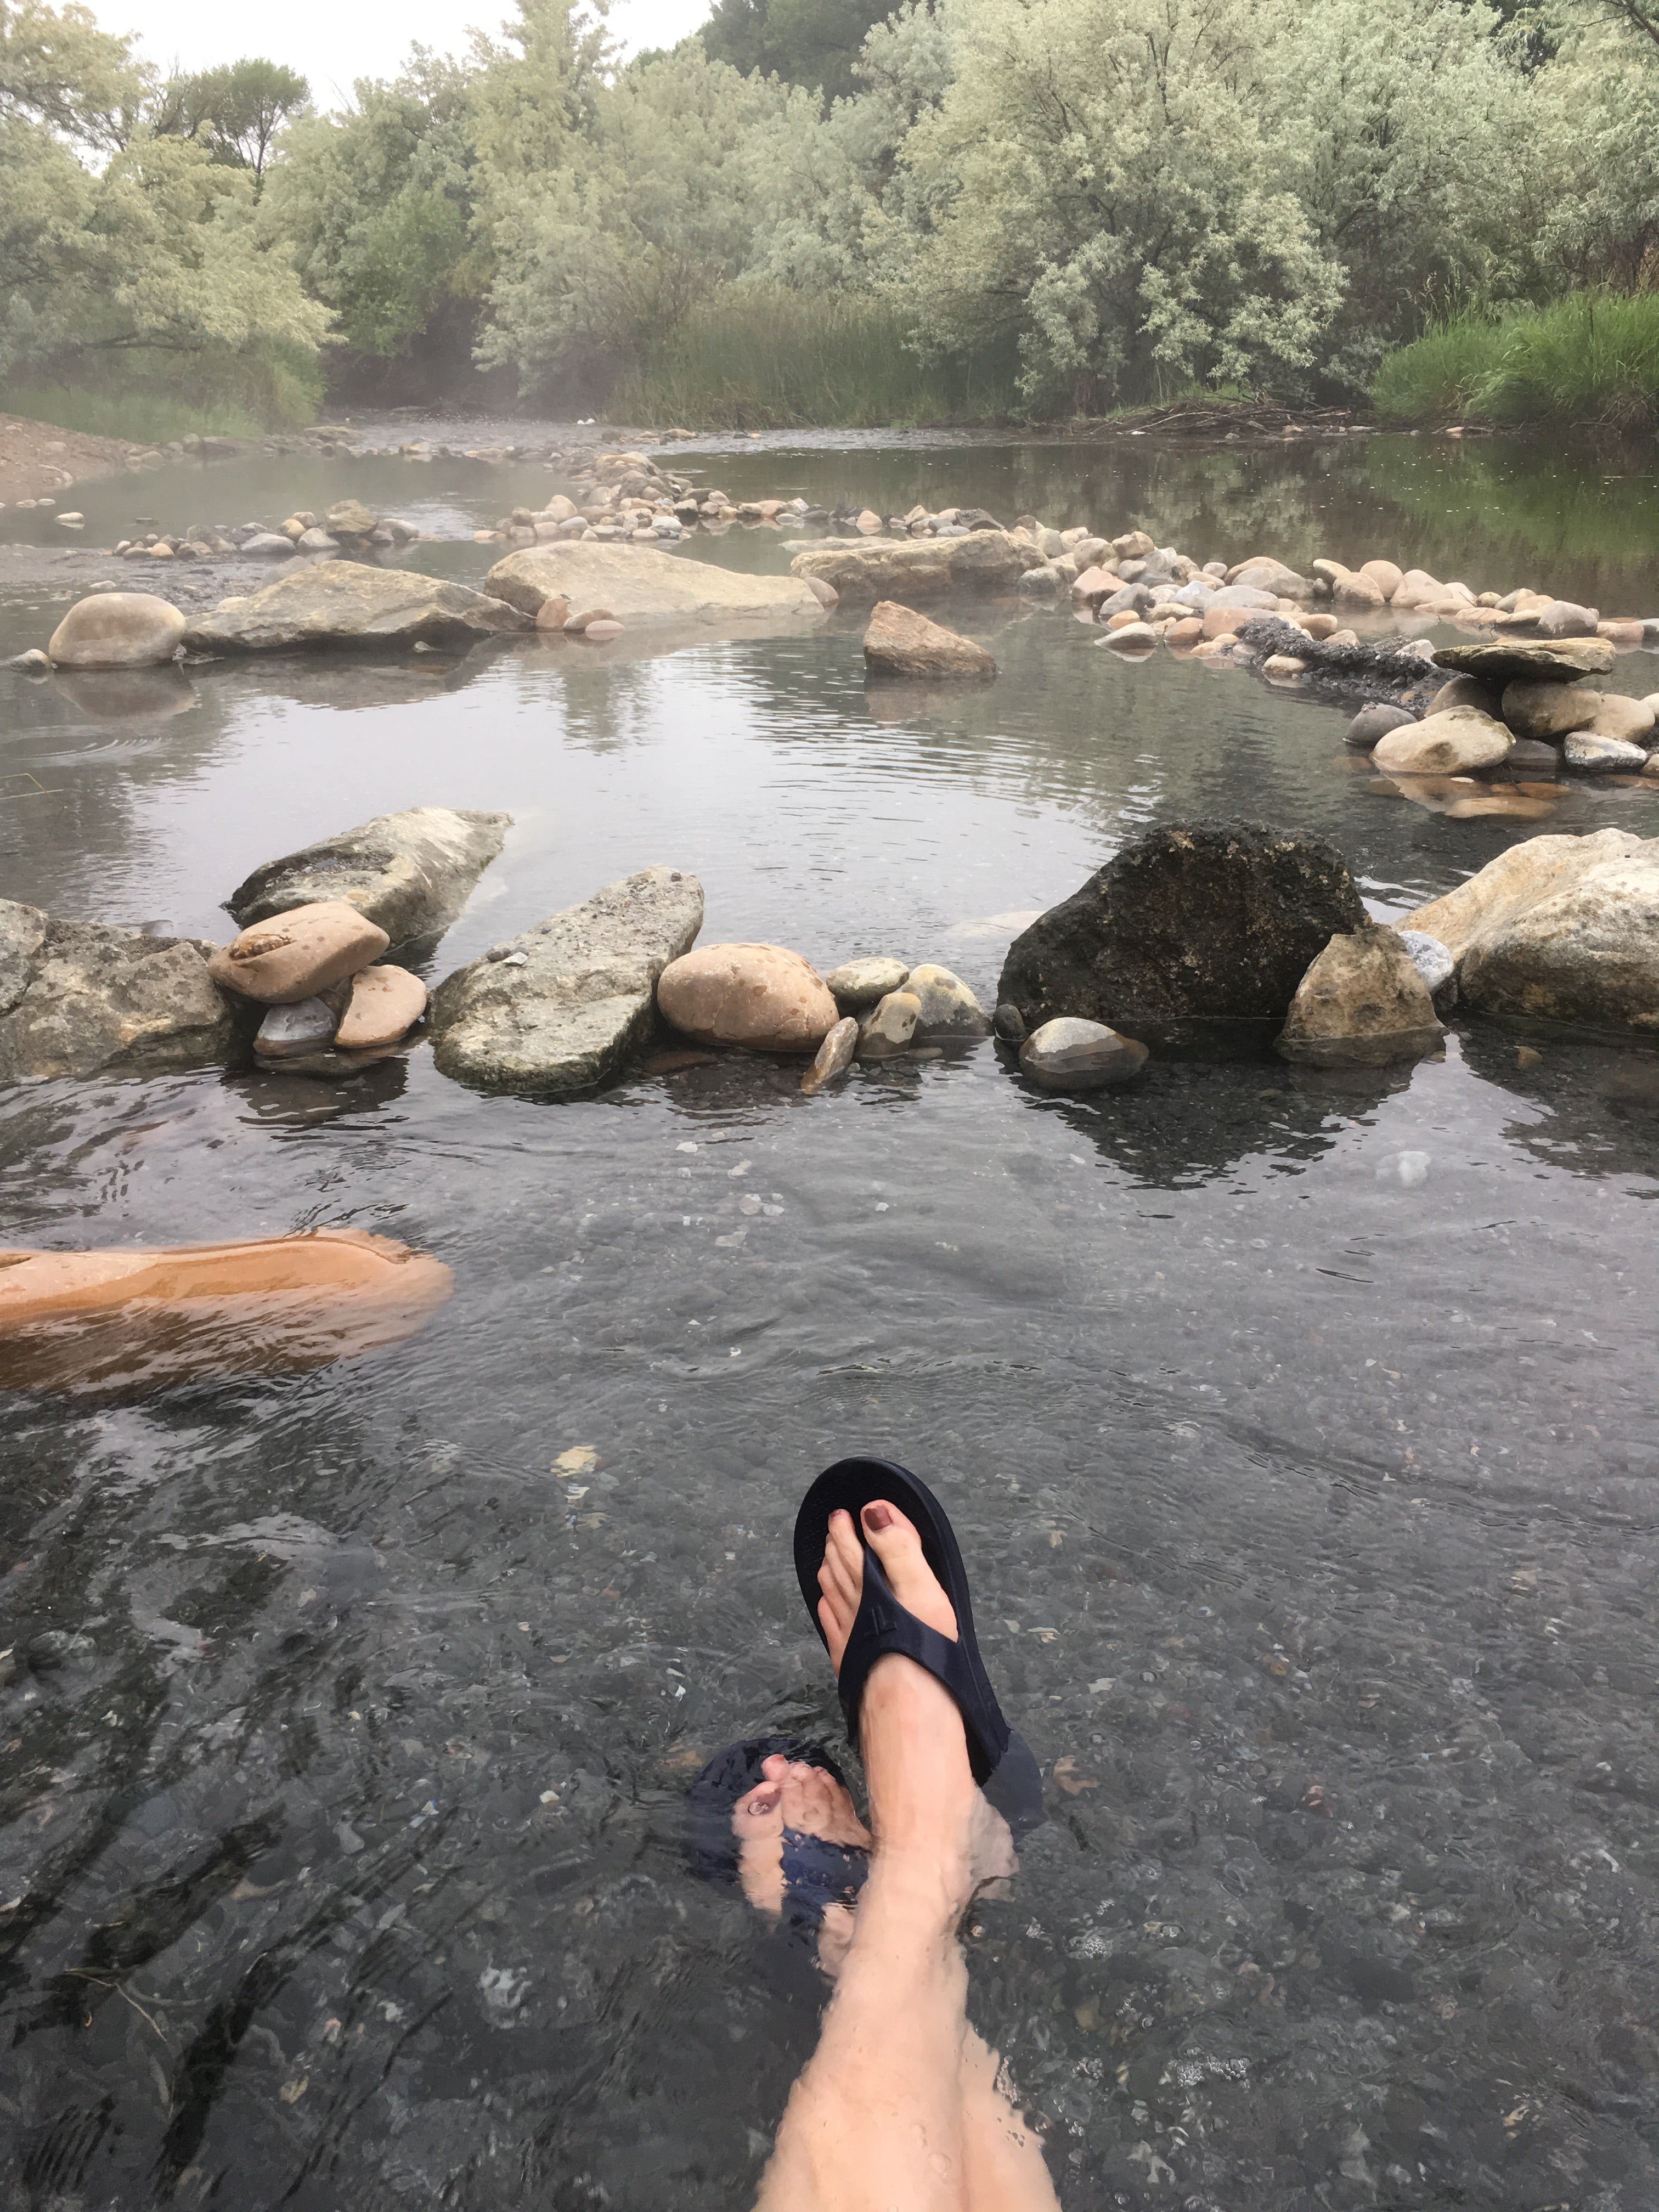 Sitting in the river where the hot springs water keeps things warm